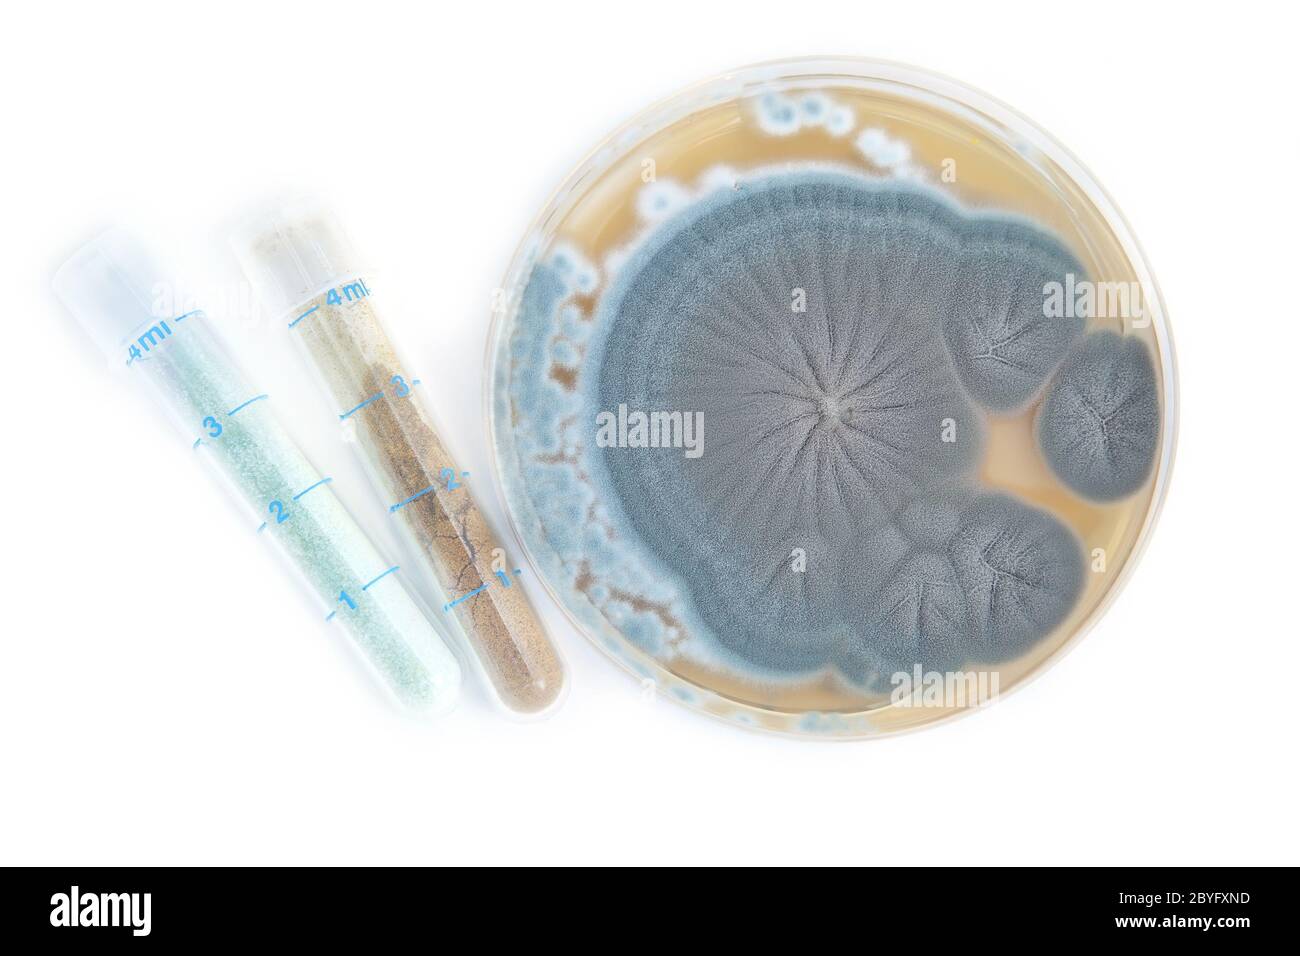 Penicillium fungi on agar plate and tubes with ant Stock Photo